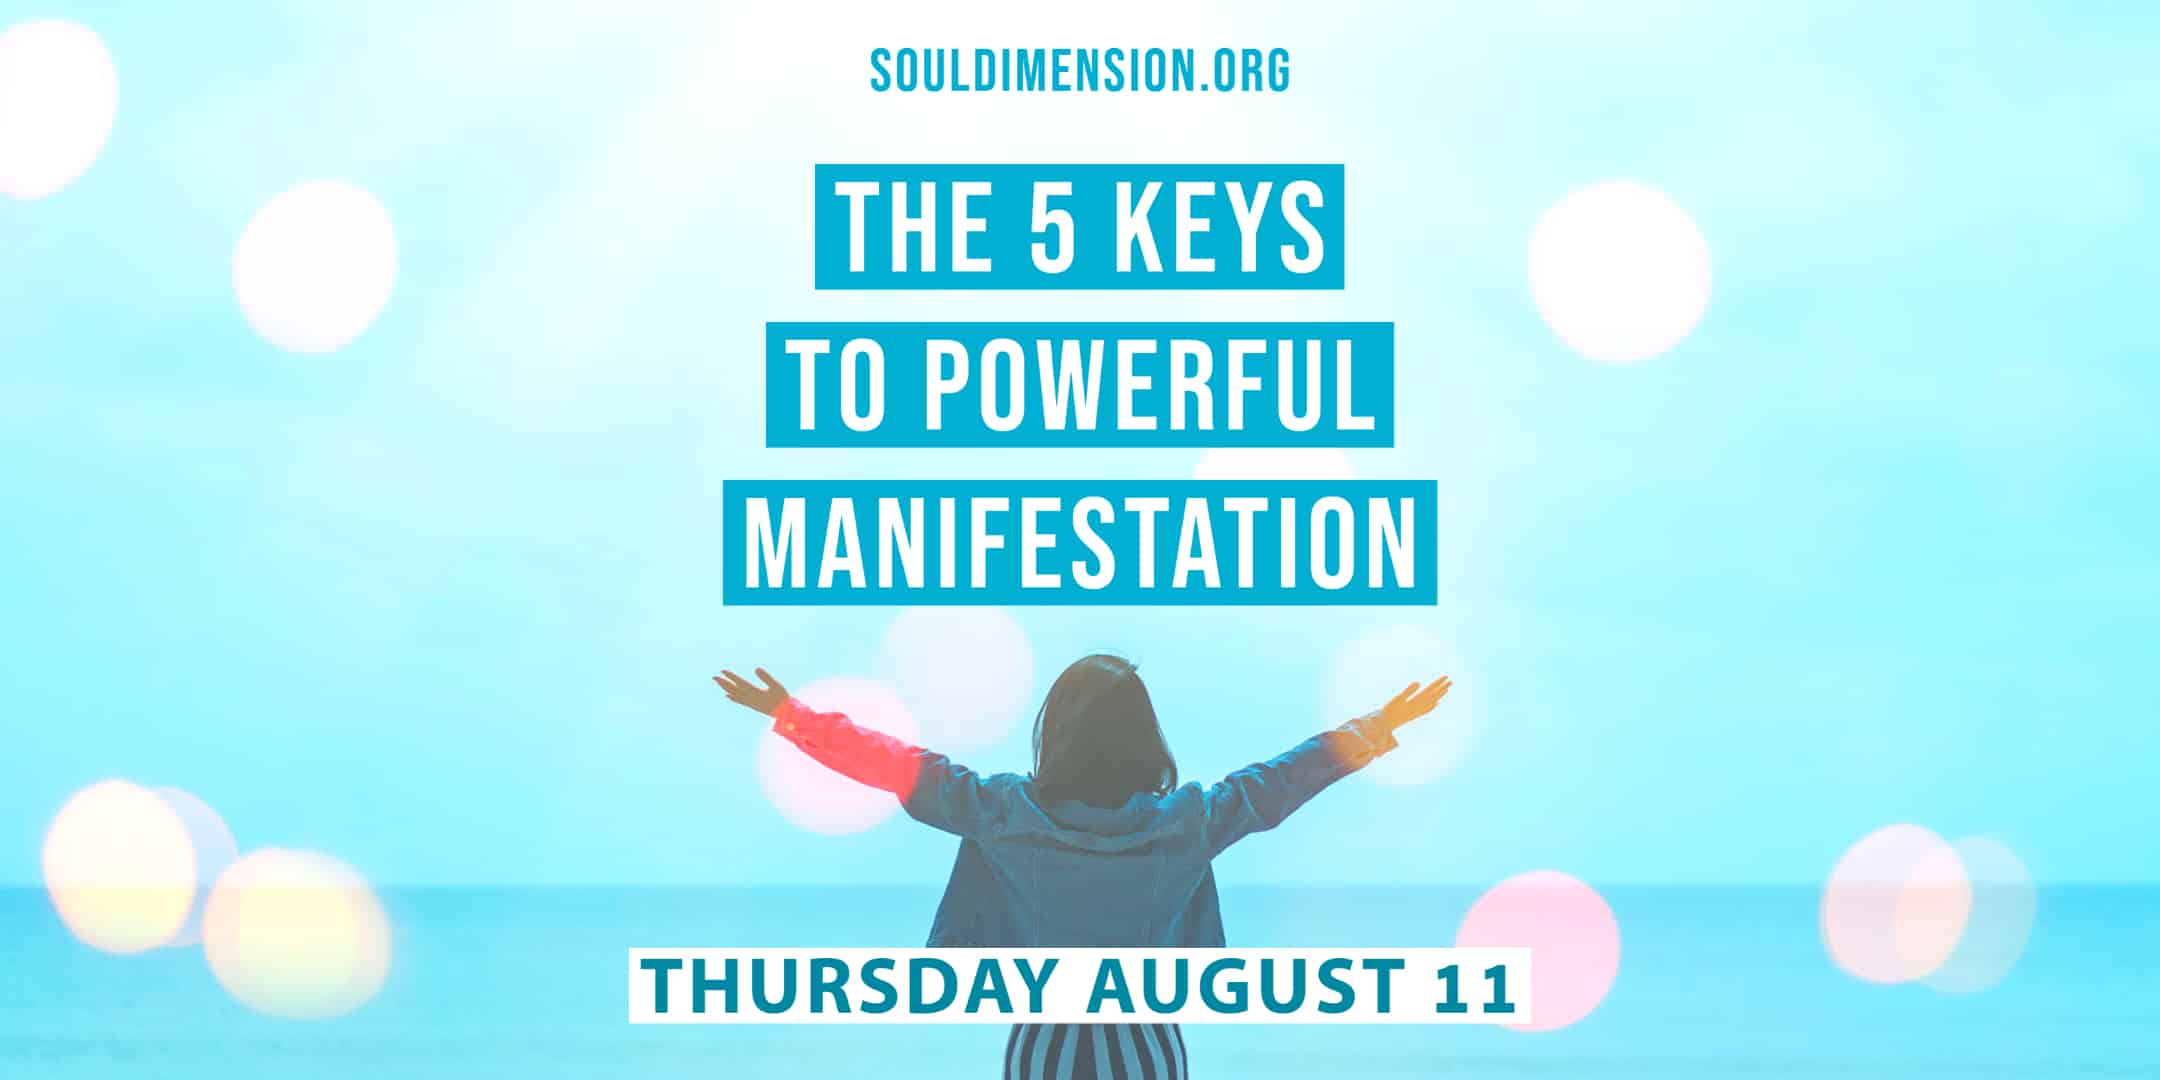 The 5 Keys to Powerful Manifestation Breathwork Event at Soul Dimension